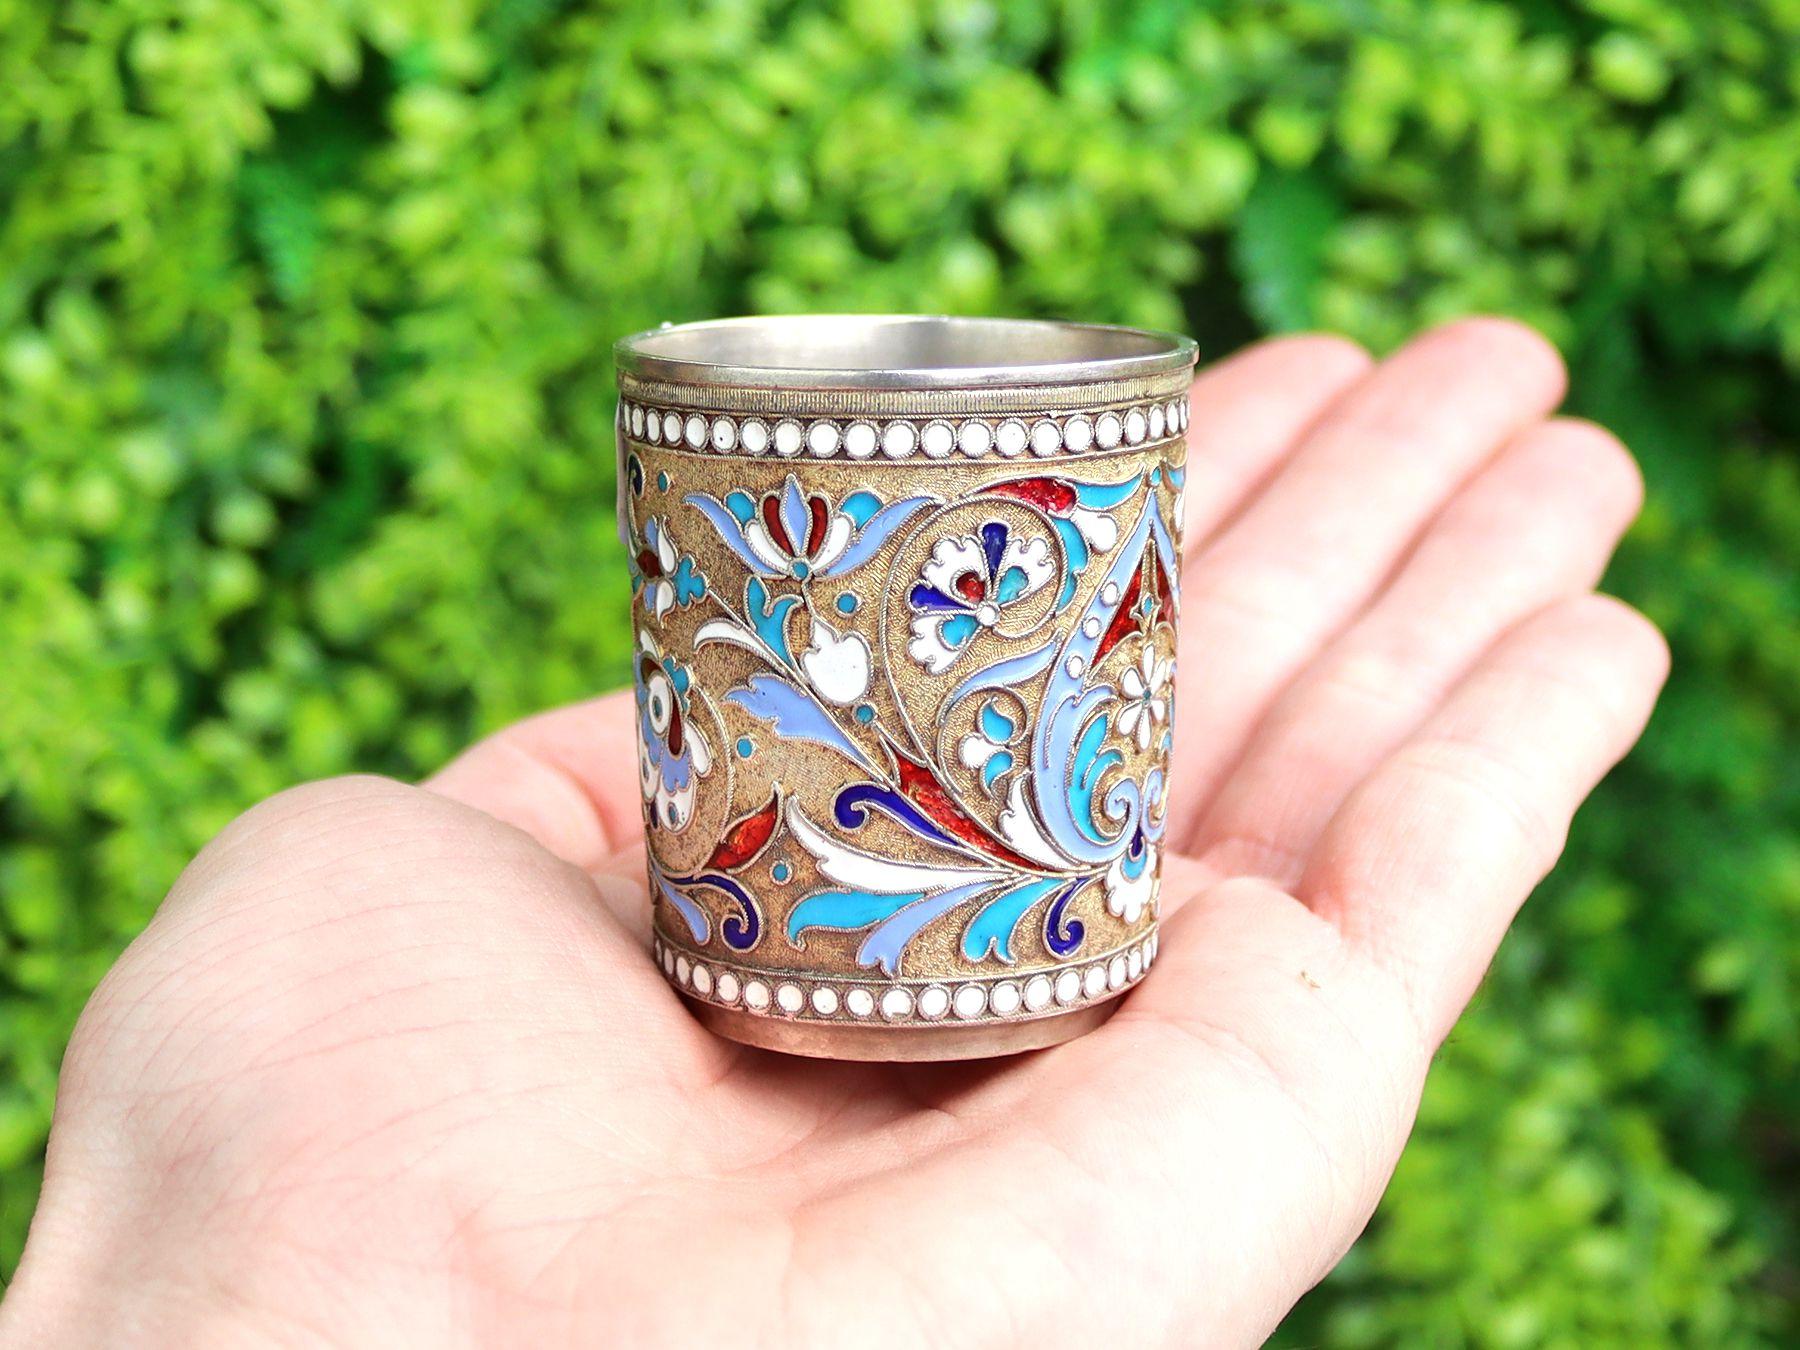 An exceptional, fine and impressive antique Russian silver and polychrome cloisonné enamel vodka cup or beaker: An addition to our range of drinks related silverware.

This exceptional antique Russian silver gilt vodka cup or beaker has a